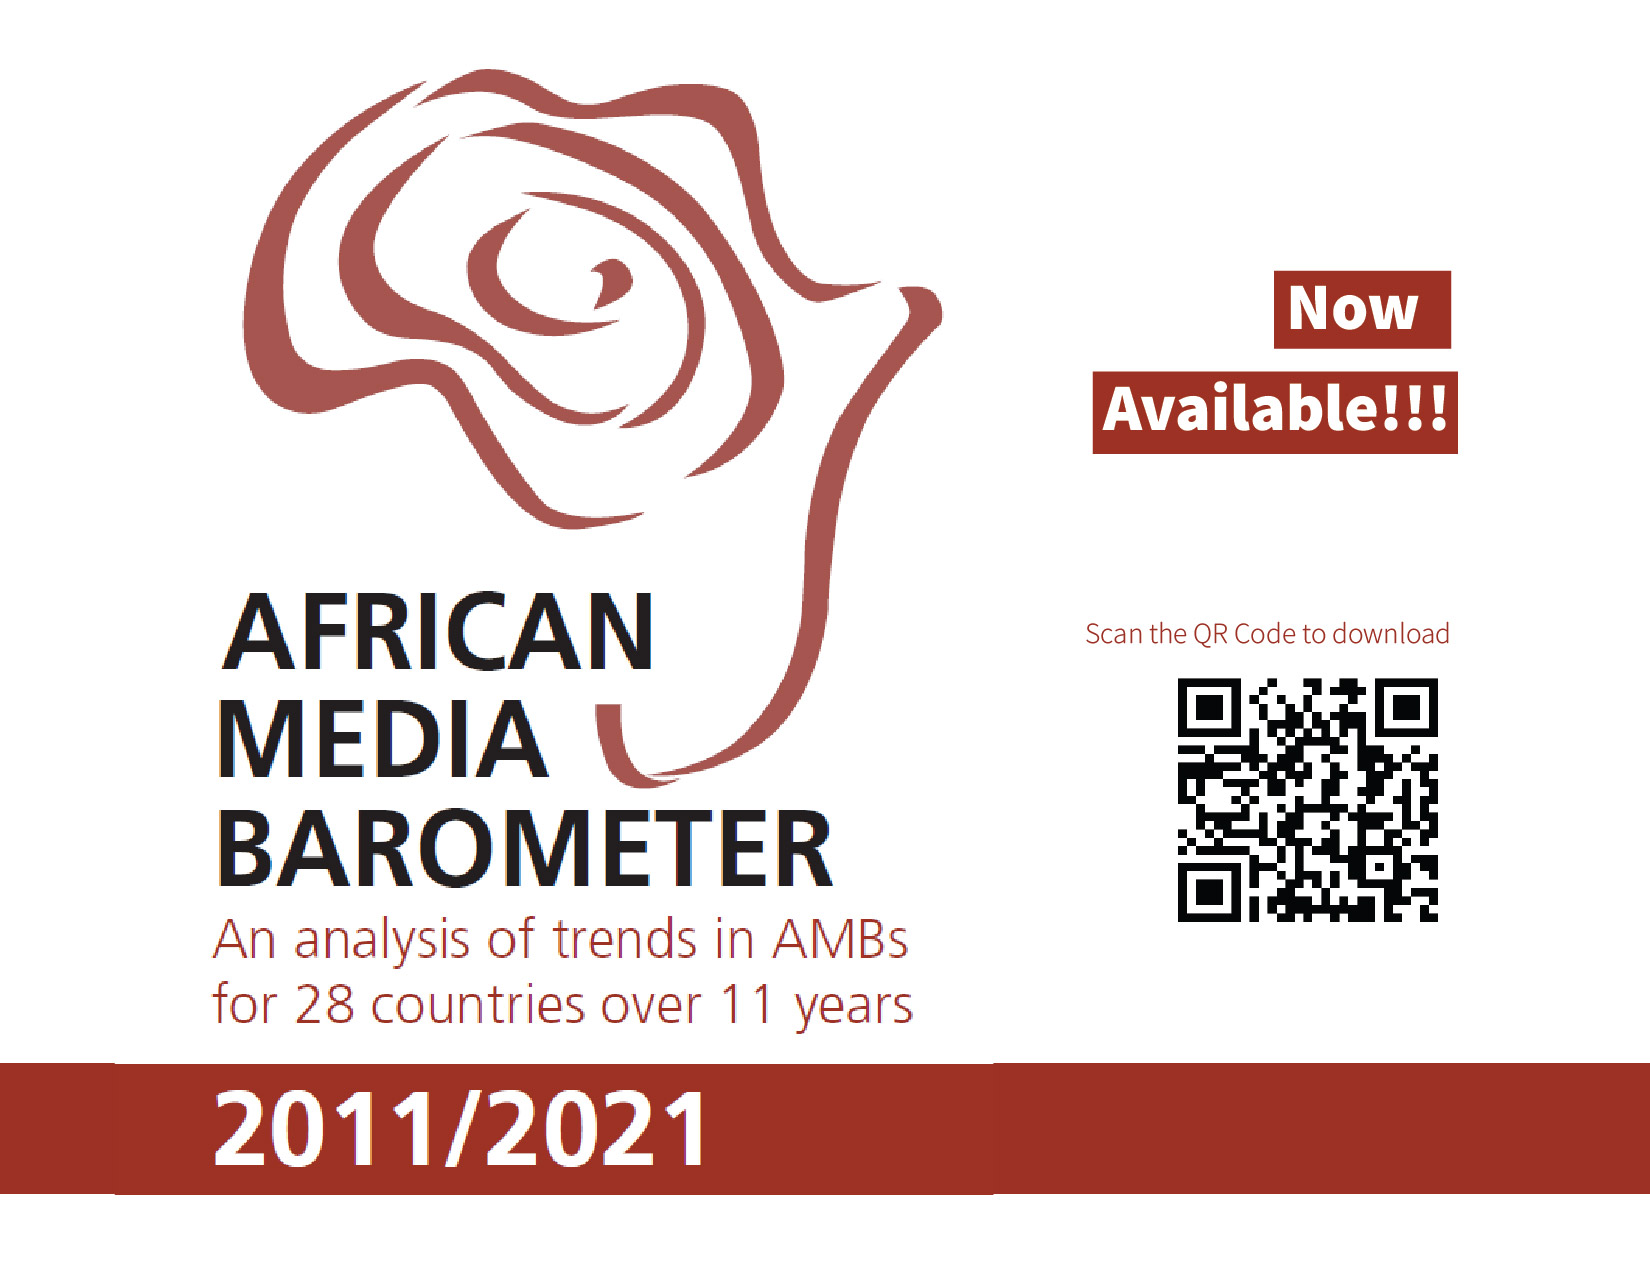 AFRICAN MEDIA BAROMETER An analysis of trends in AMBs for 28 countries over 11 years